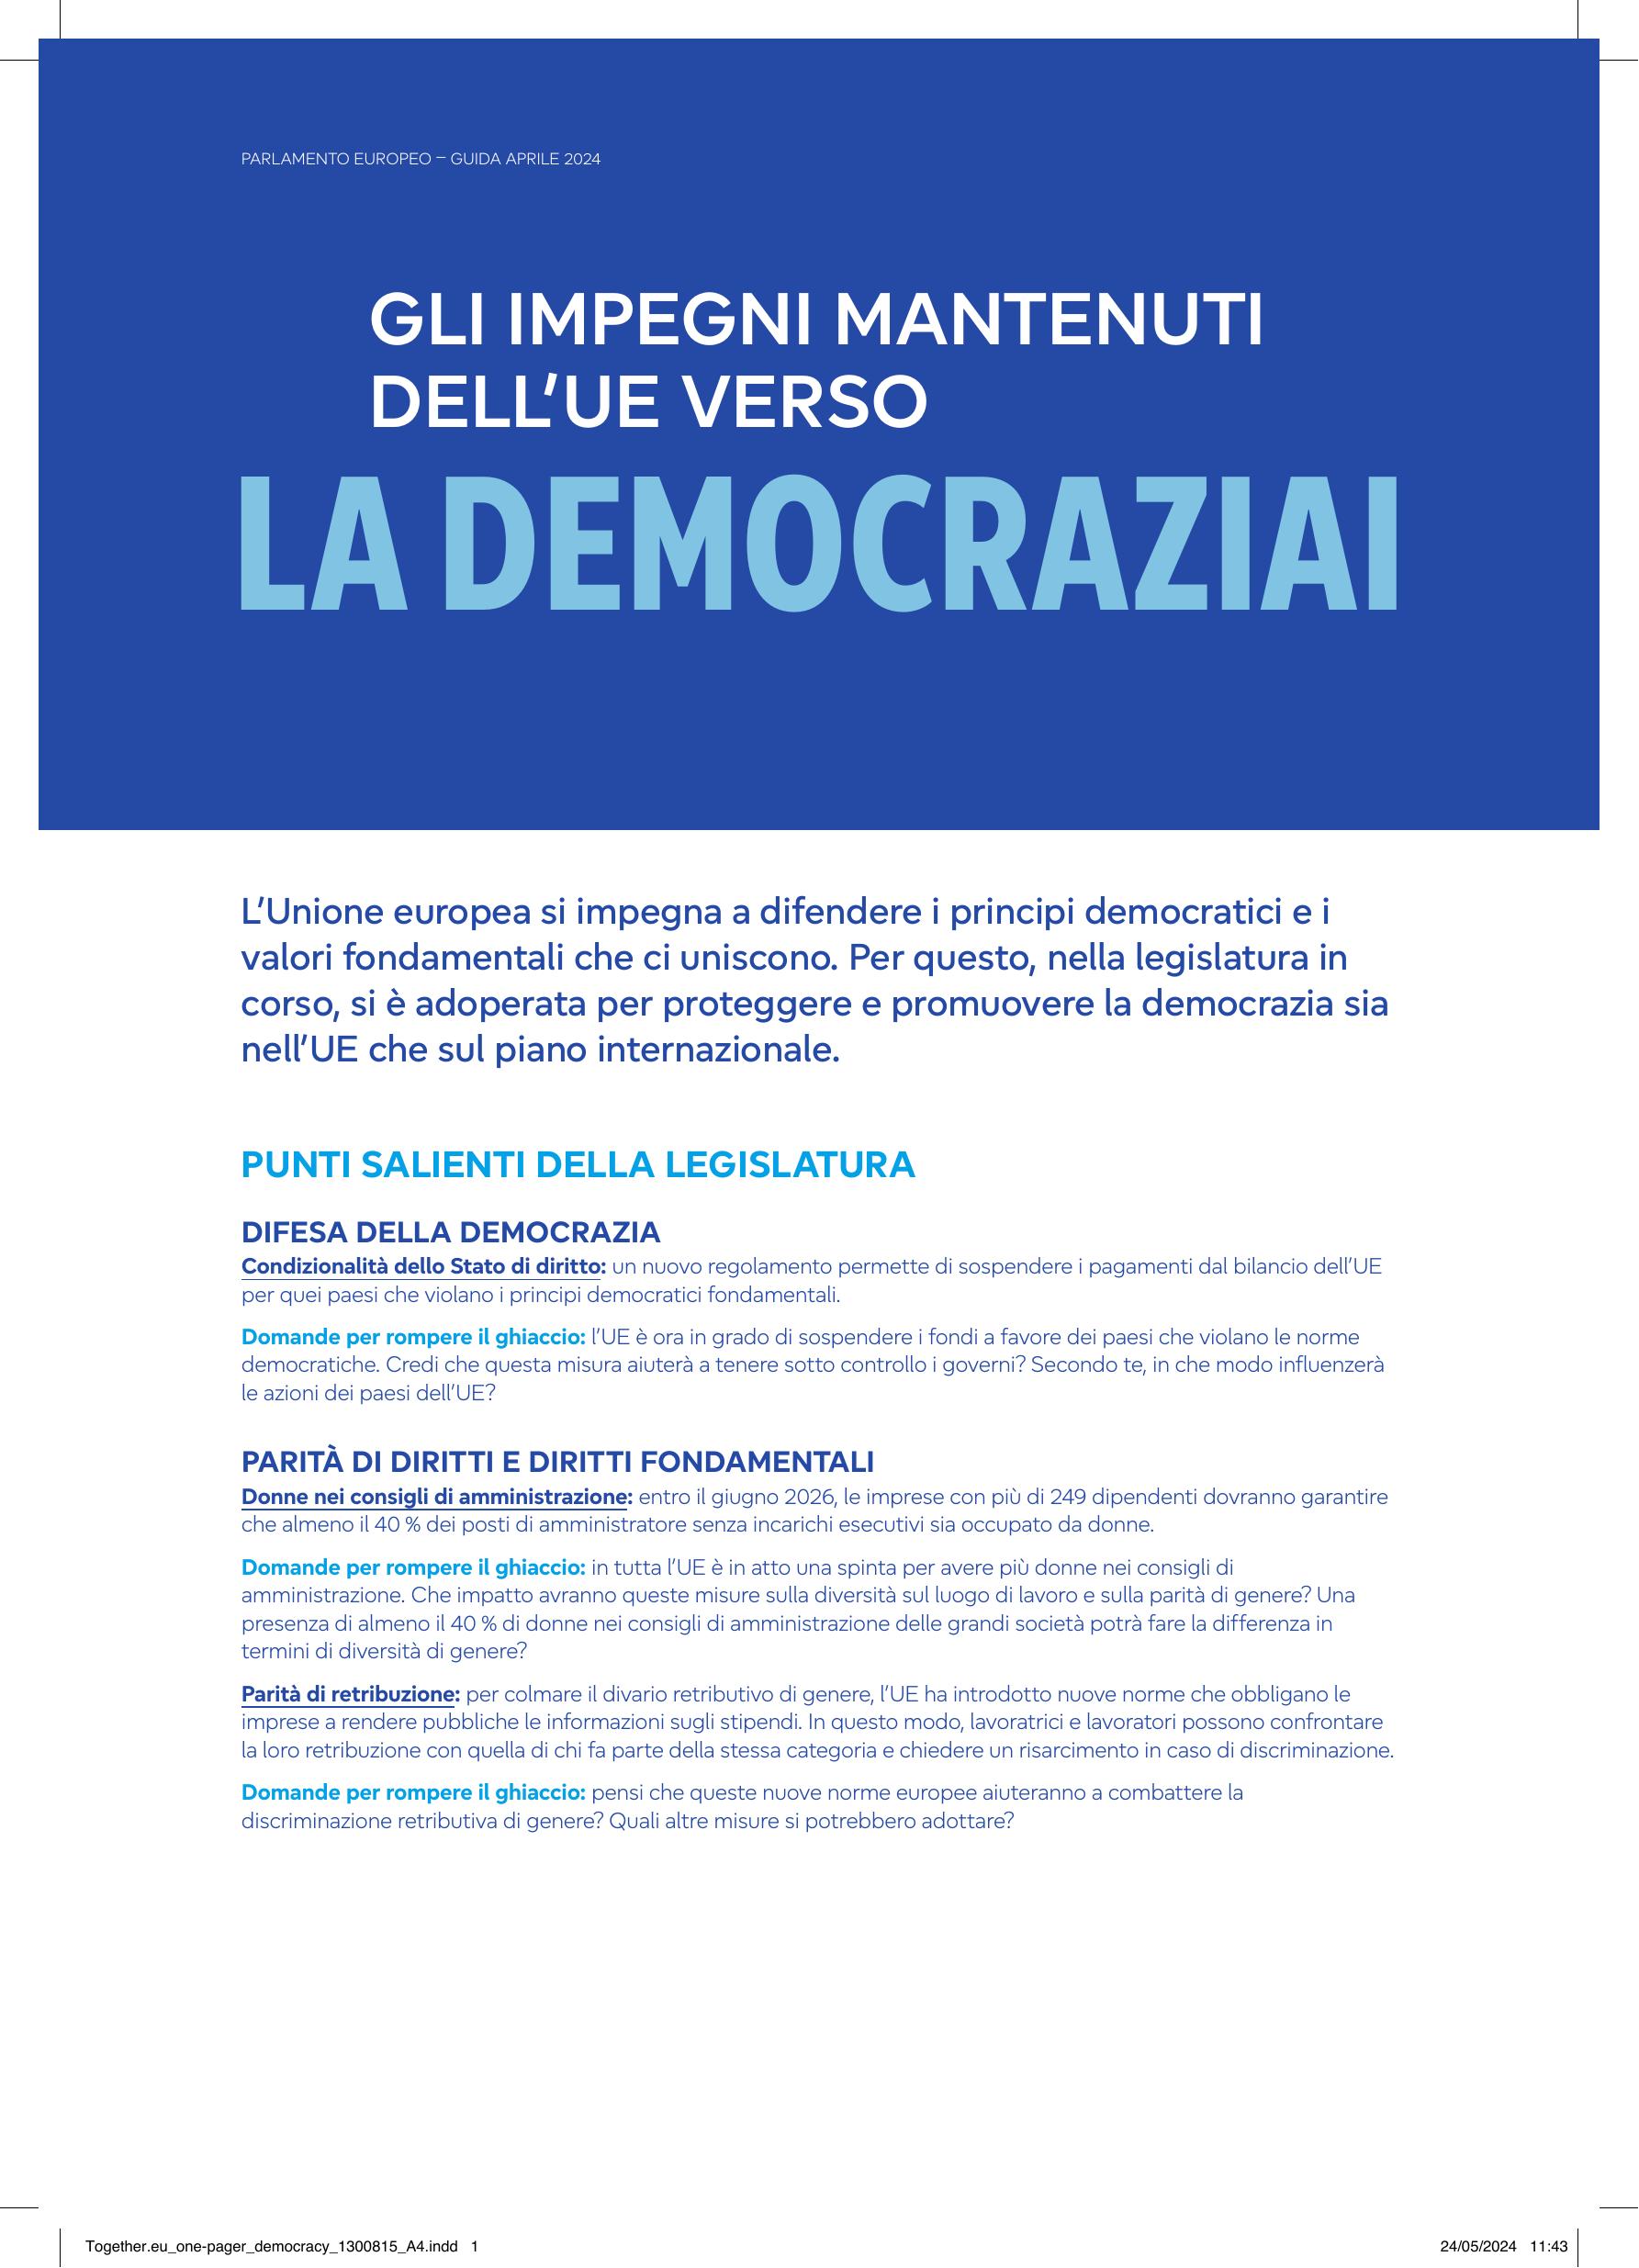 Together.eu_one-pager_democracy_print.pdf